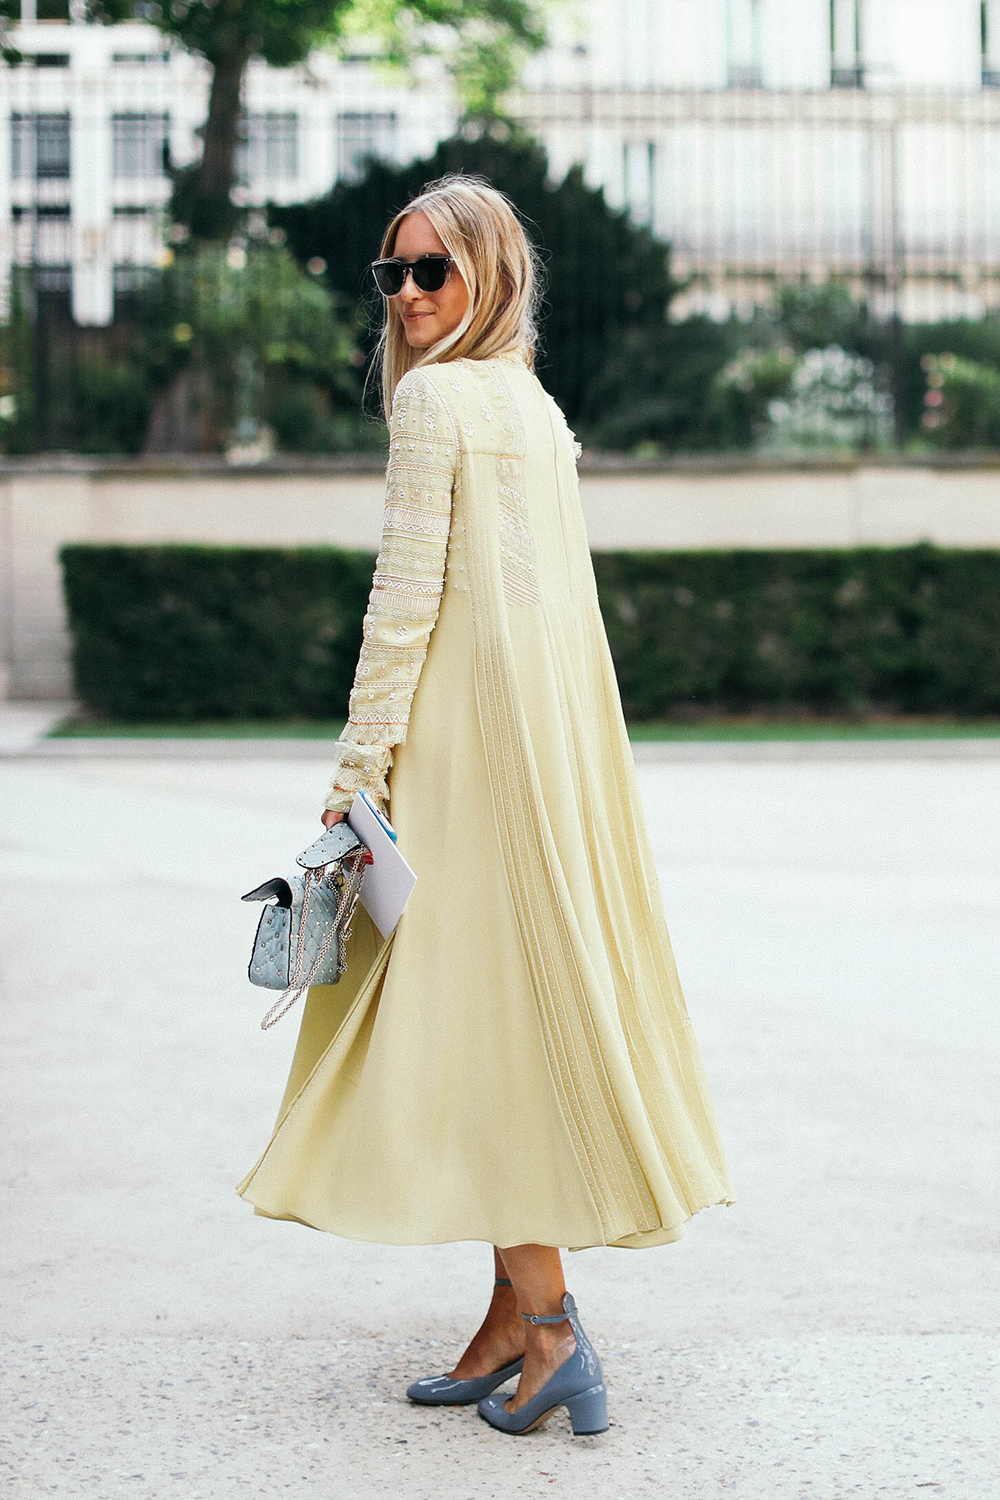 Charlotte Groeneveld Thefashionguitar attends the Valentino Haute Couture show in Paris